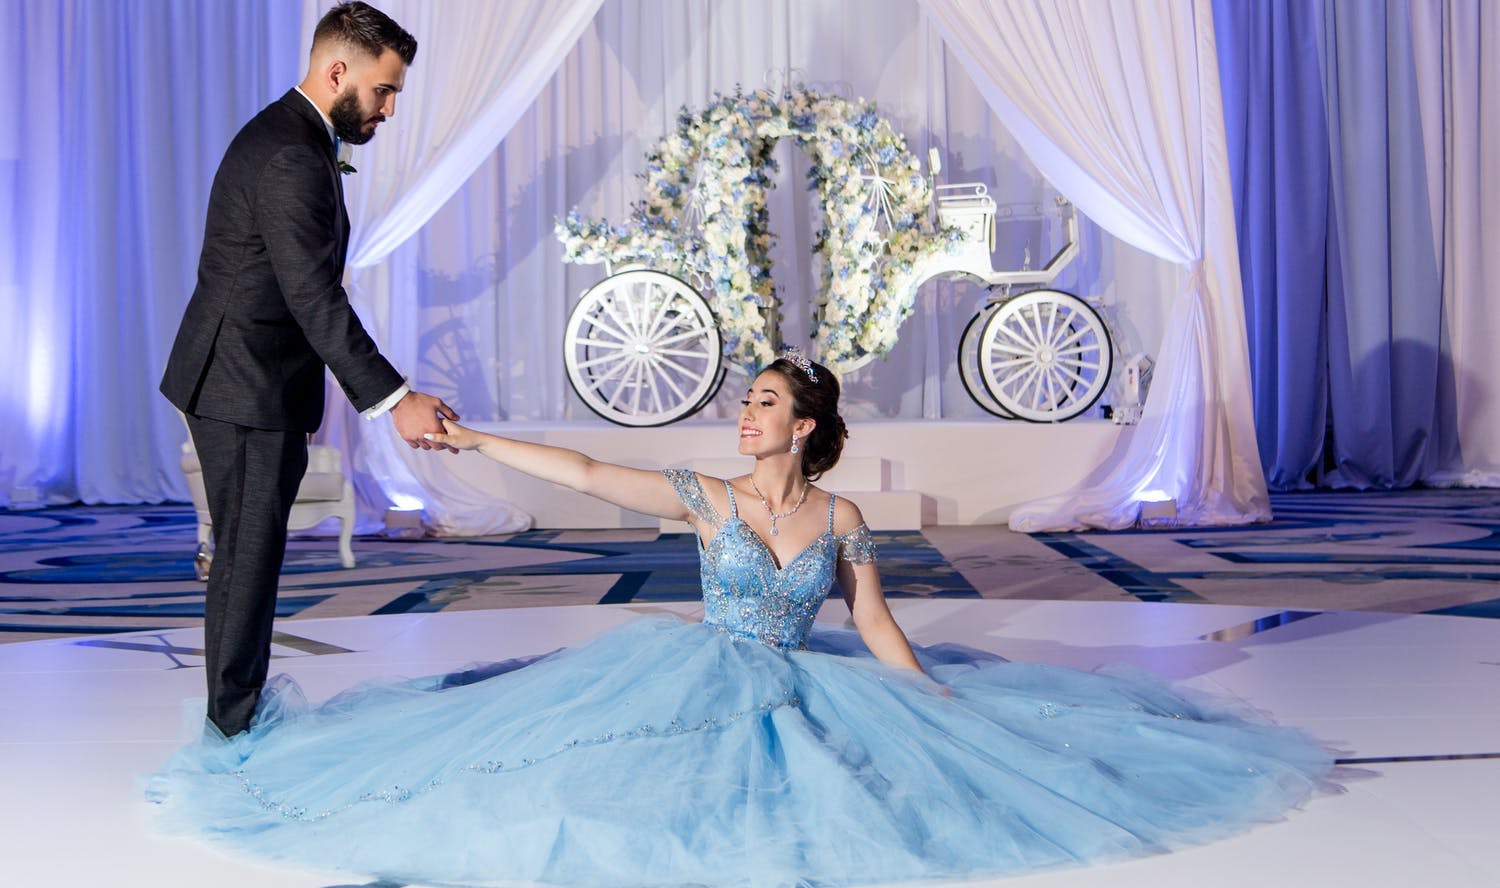 Cinderella-themed quinceañera with timepiece dance floor and carriage backdrop | PartySlate